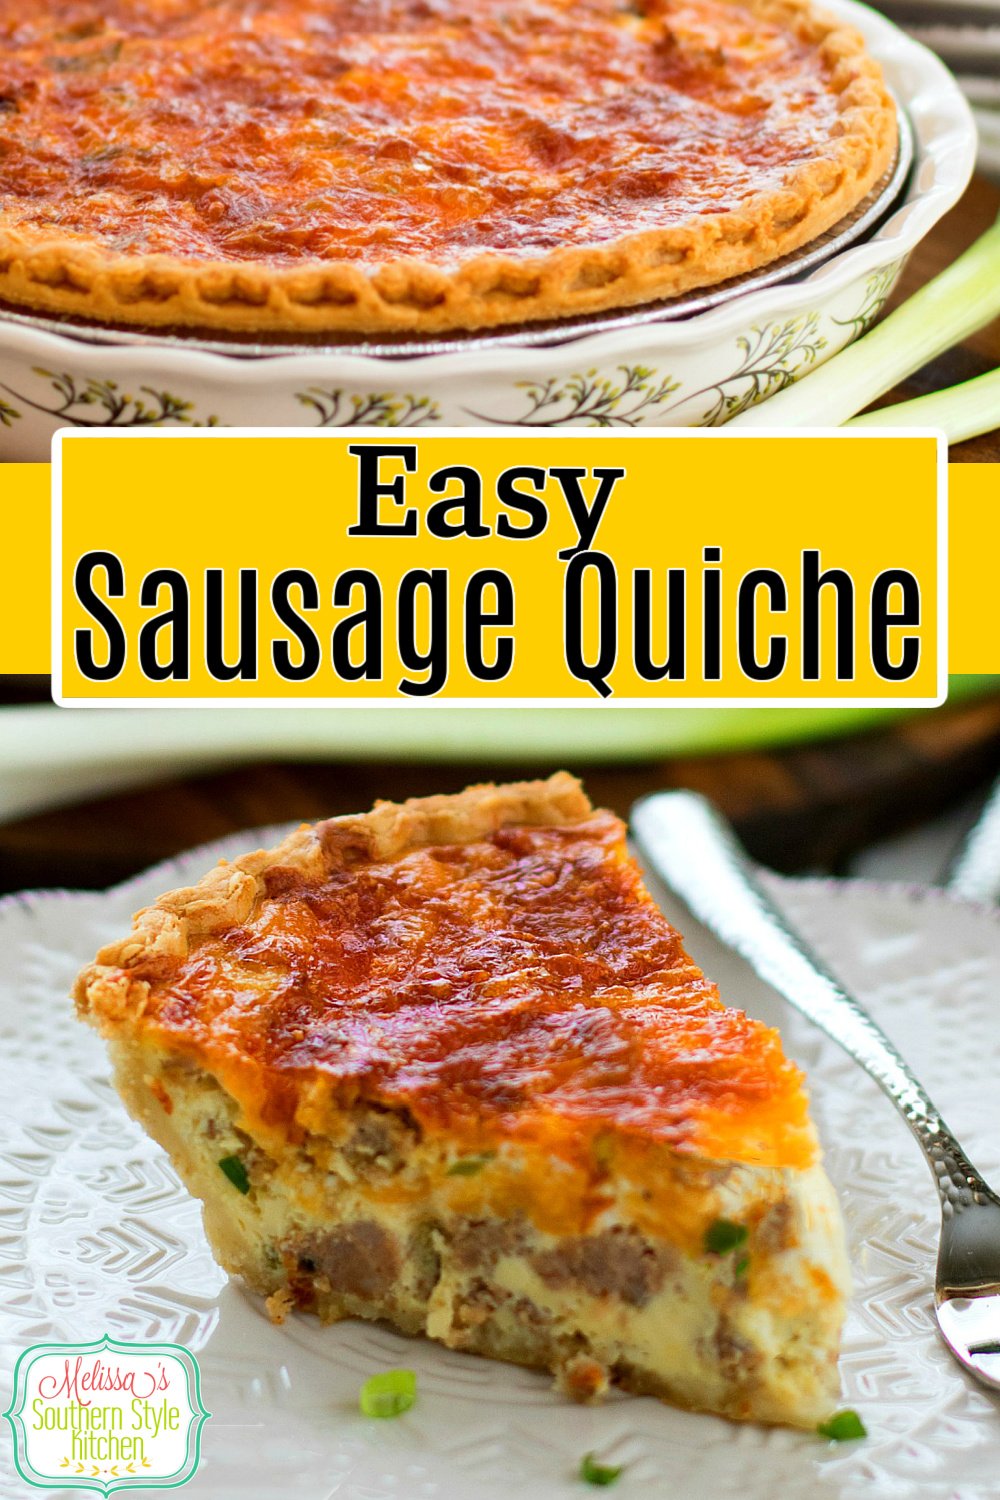 This Easy Sausage Quiche turns pantry staples into an any-time-of-day quiche feast #sausagequiche #quicherecipes #easysausagequiche #bestquicherecipes #brunch #breakfast #holidaybrunch #christmasbrunch #easyrecipes #dinner #southernfood #eggs #sausage #porkrecipes #southernrecipes